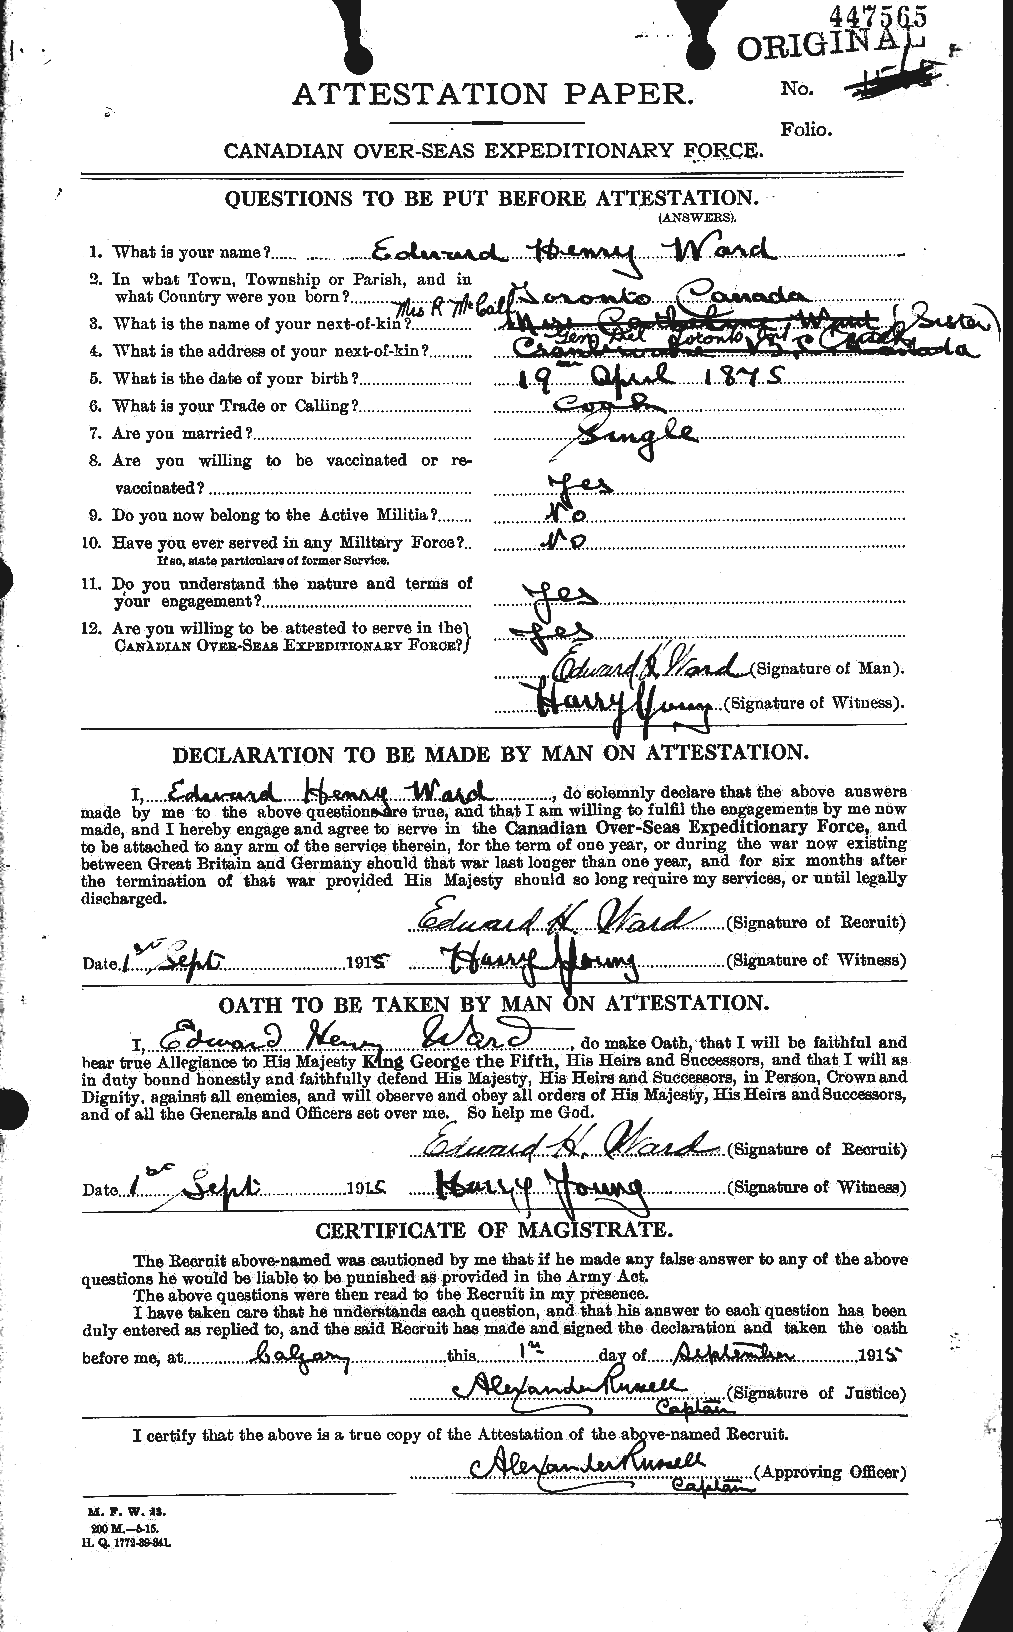 Personnel Records of the First World War - CEF 657651a